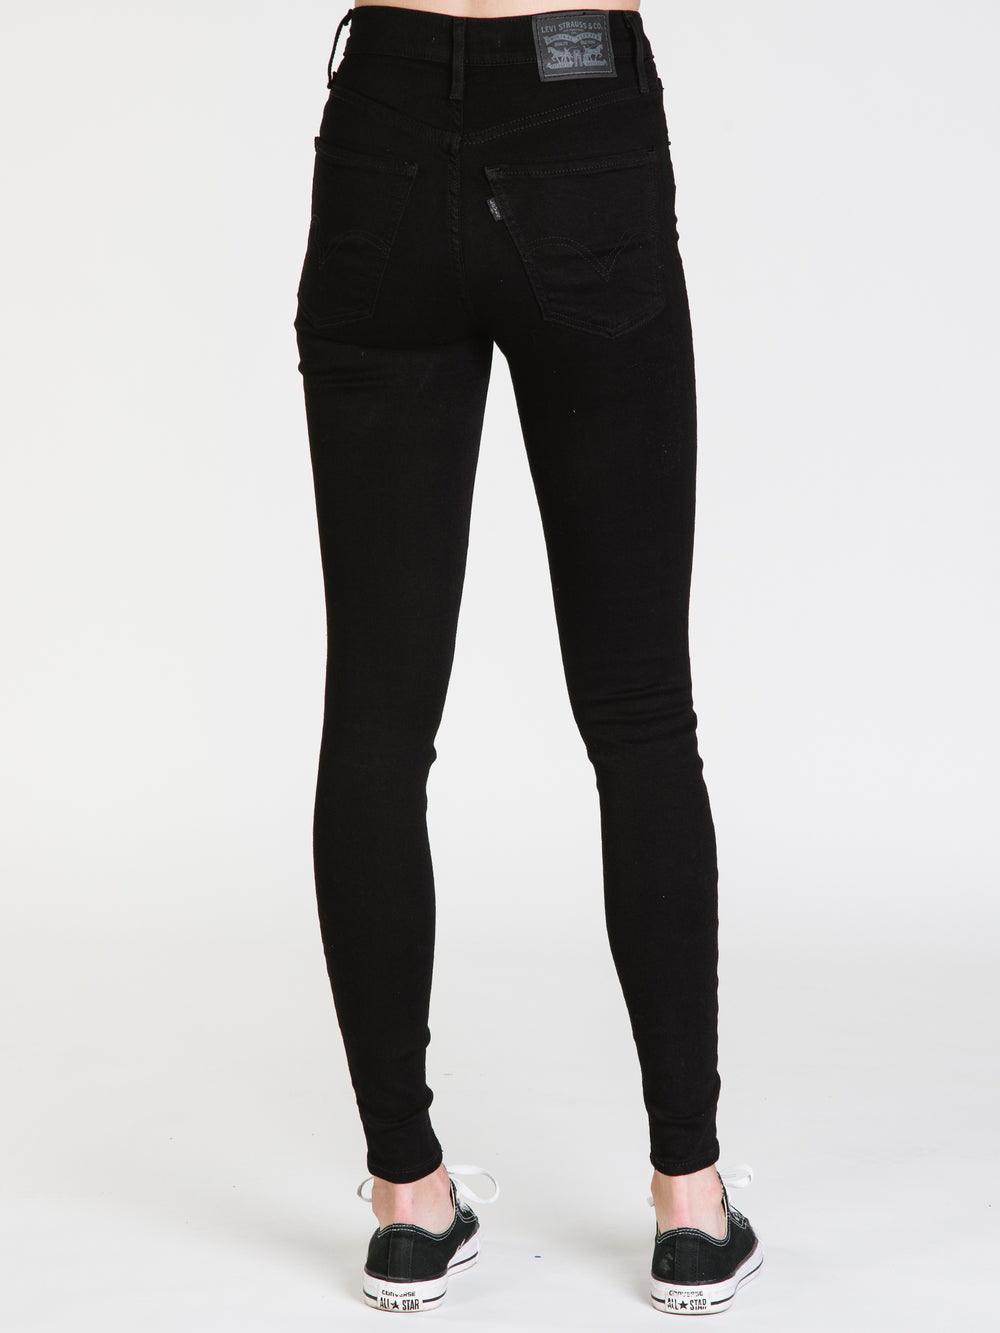 LEVIS MILE HIGH SUPER SKINNY JEAN - CLEARANCE